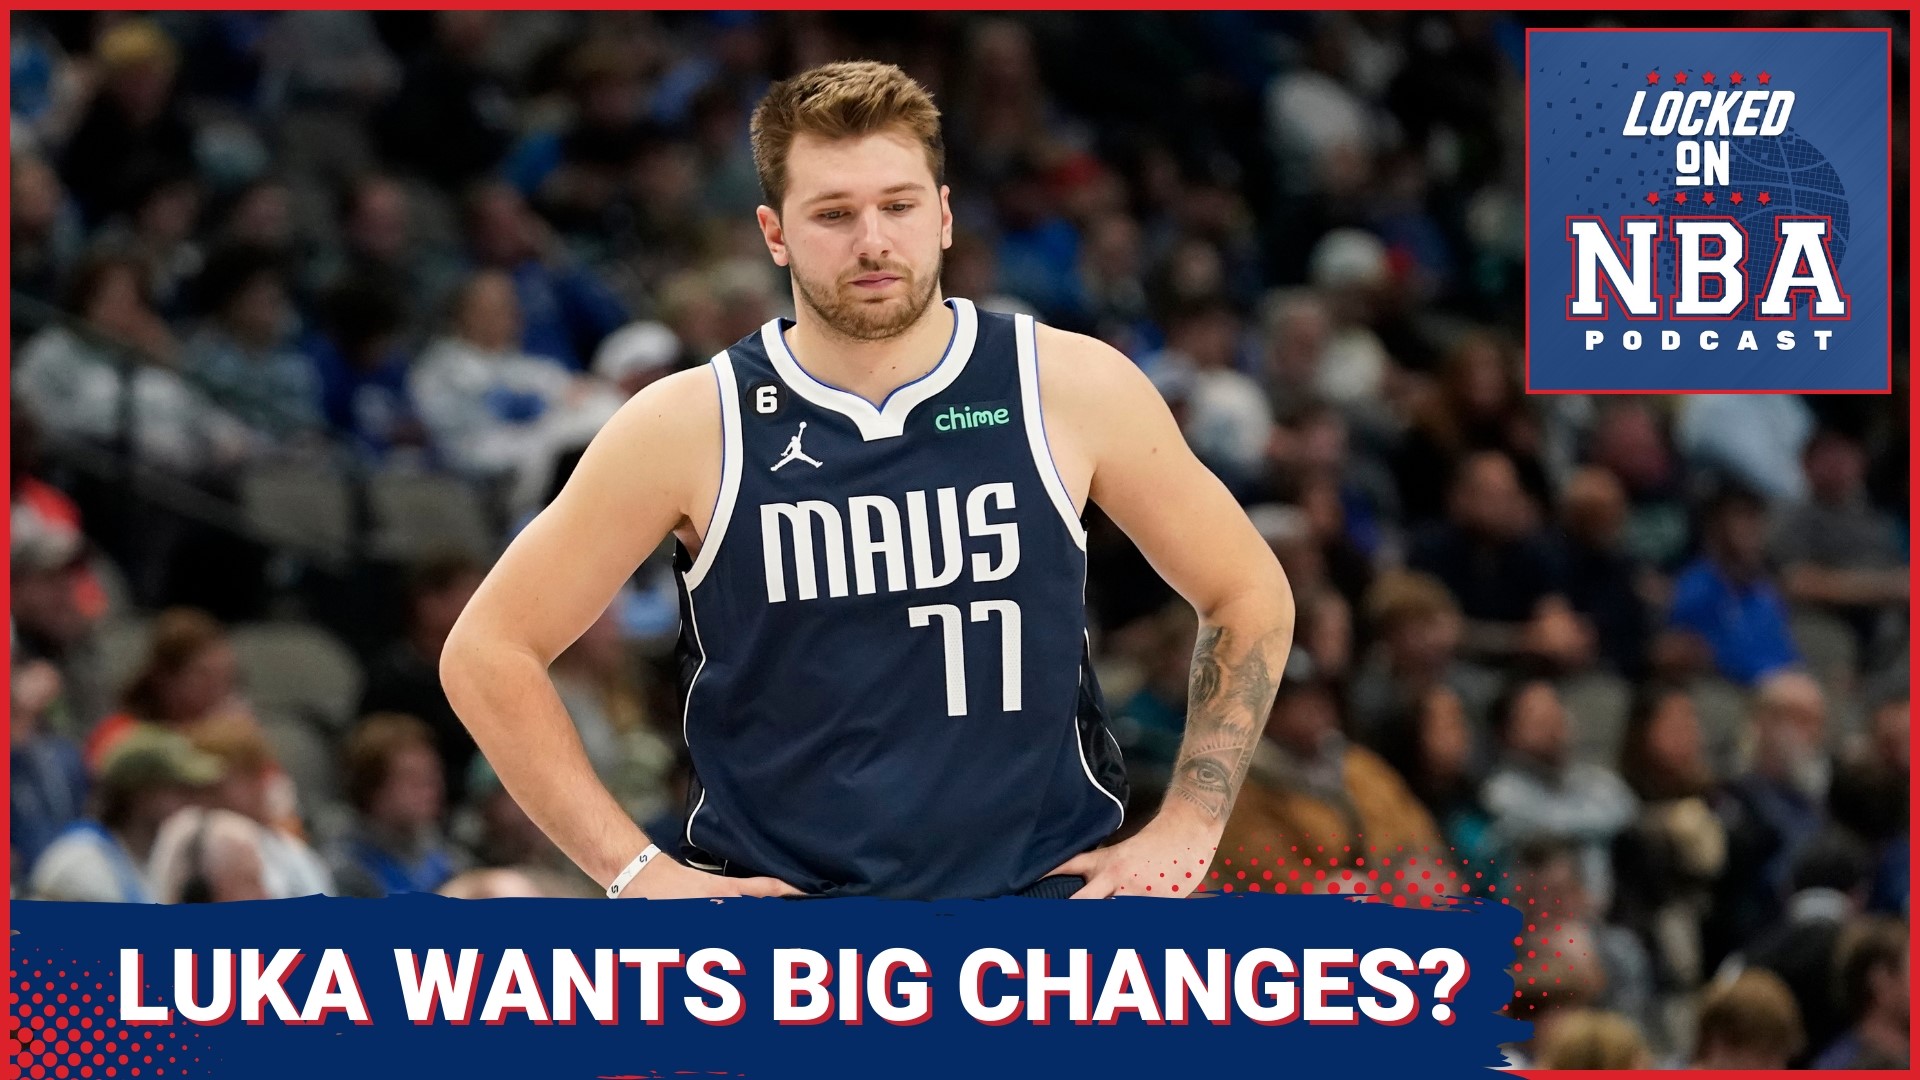 Reports say Luka Doncic wants the Dallas Mavericks to make roster upgrades but he and Mark Cuban deny the reports, why?